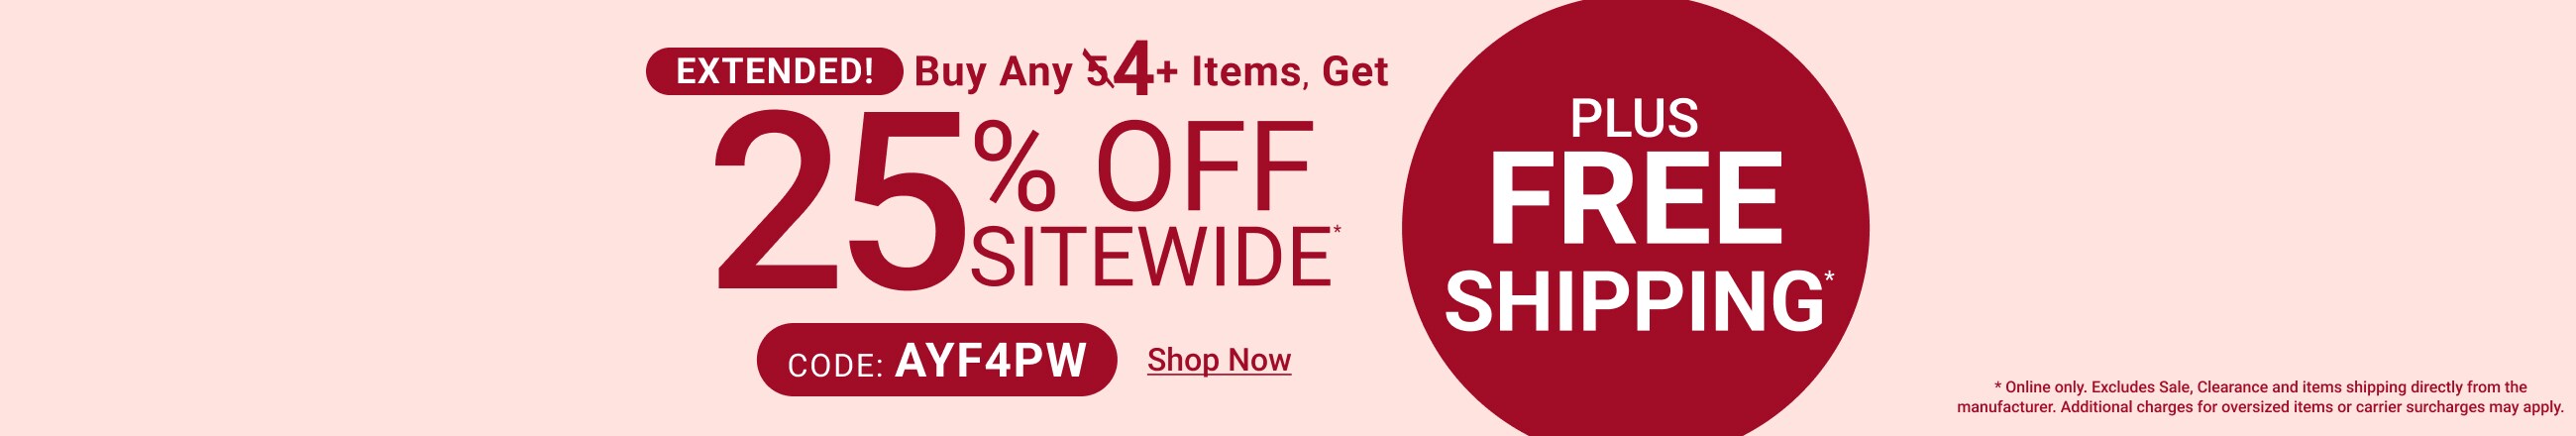 Extended! Buy any 4+ Items, Get 25% Off Sitewide - Shop Now